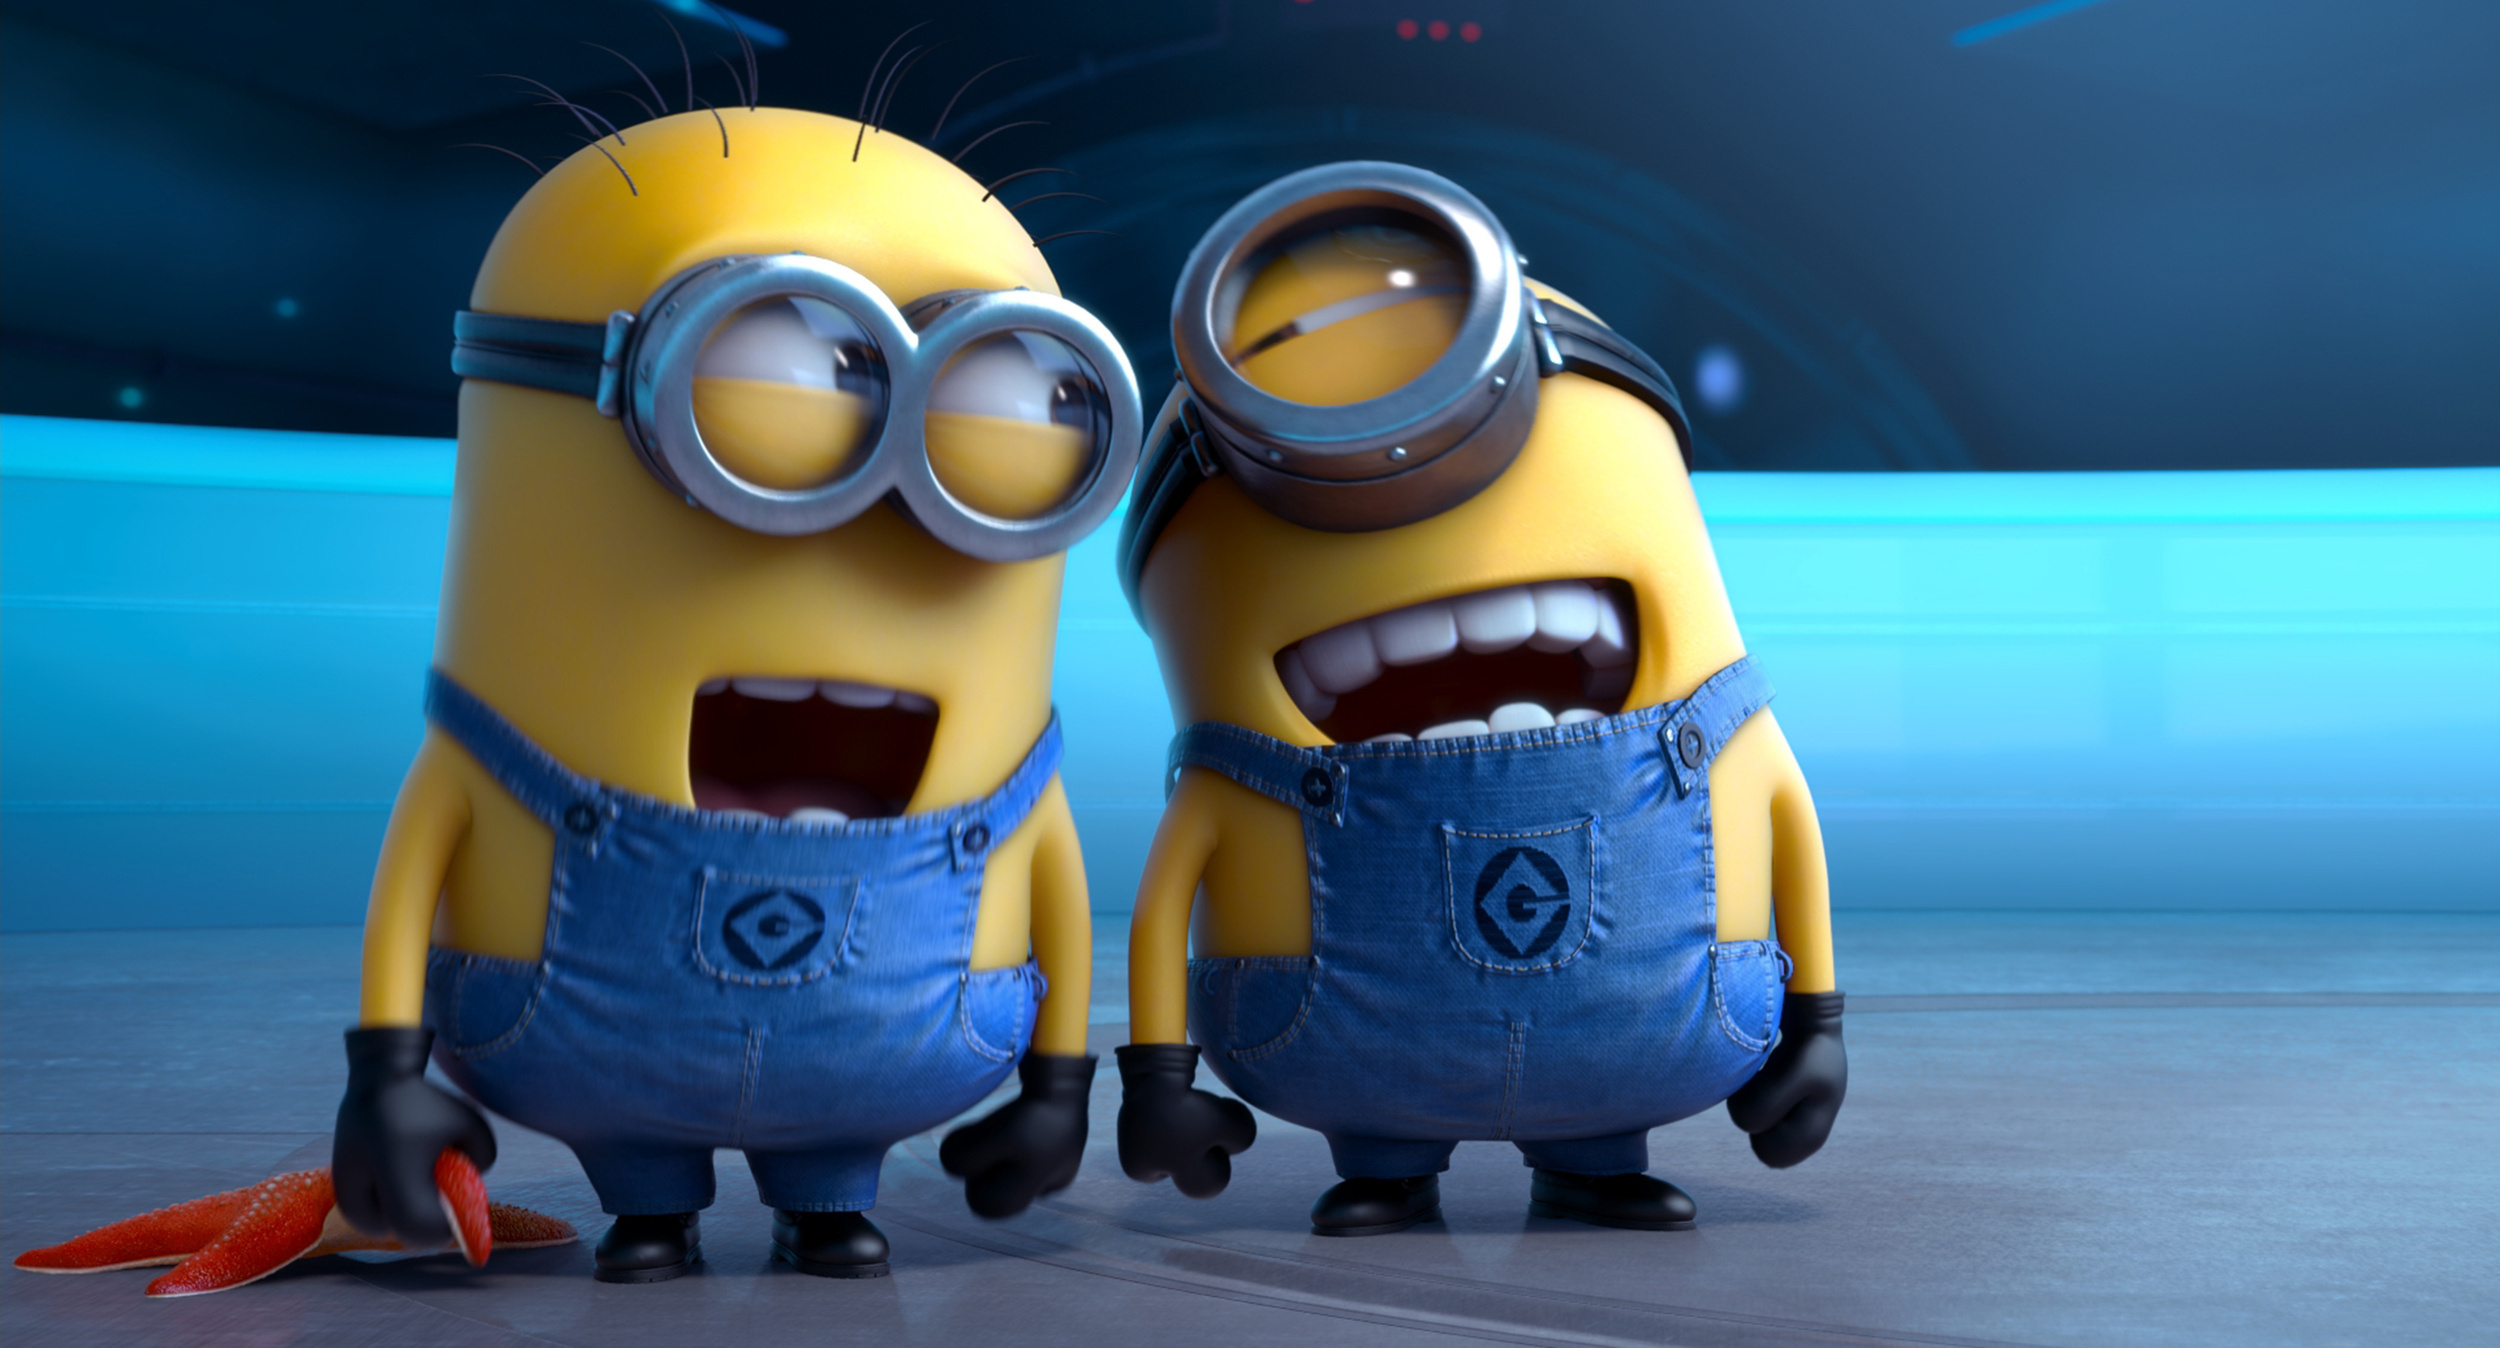 <p><span>Where would the world be without Minion memes that everyone’s least favorite aunt likes to share on Facebook?</span></p><p><a href='https://www.msn.com/en-us/community/channel/vid-cj9pqbr0vn9in2b6ddcd8sfgpfq6x6utp44fssrv6mc2gtybw0us'>Did you enjoy this slideshow? Follow us on MSN to see more of our exclusive entertainment content.</a></p>